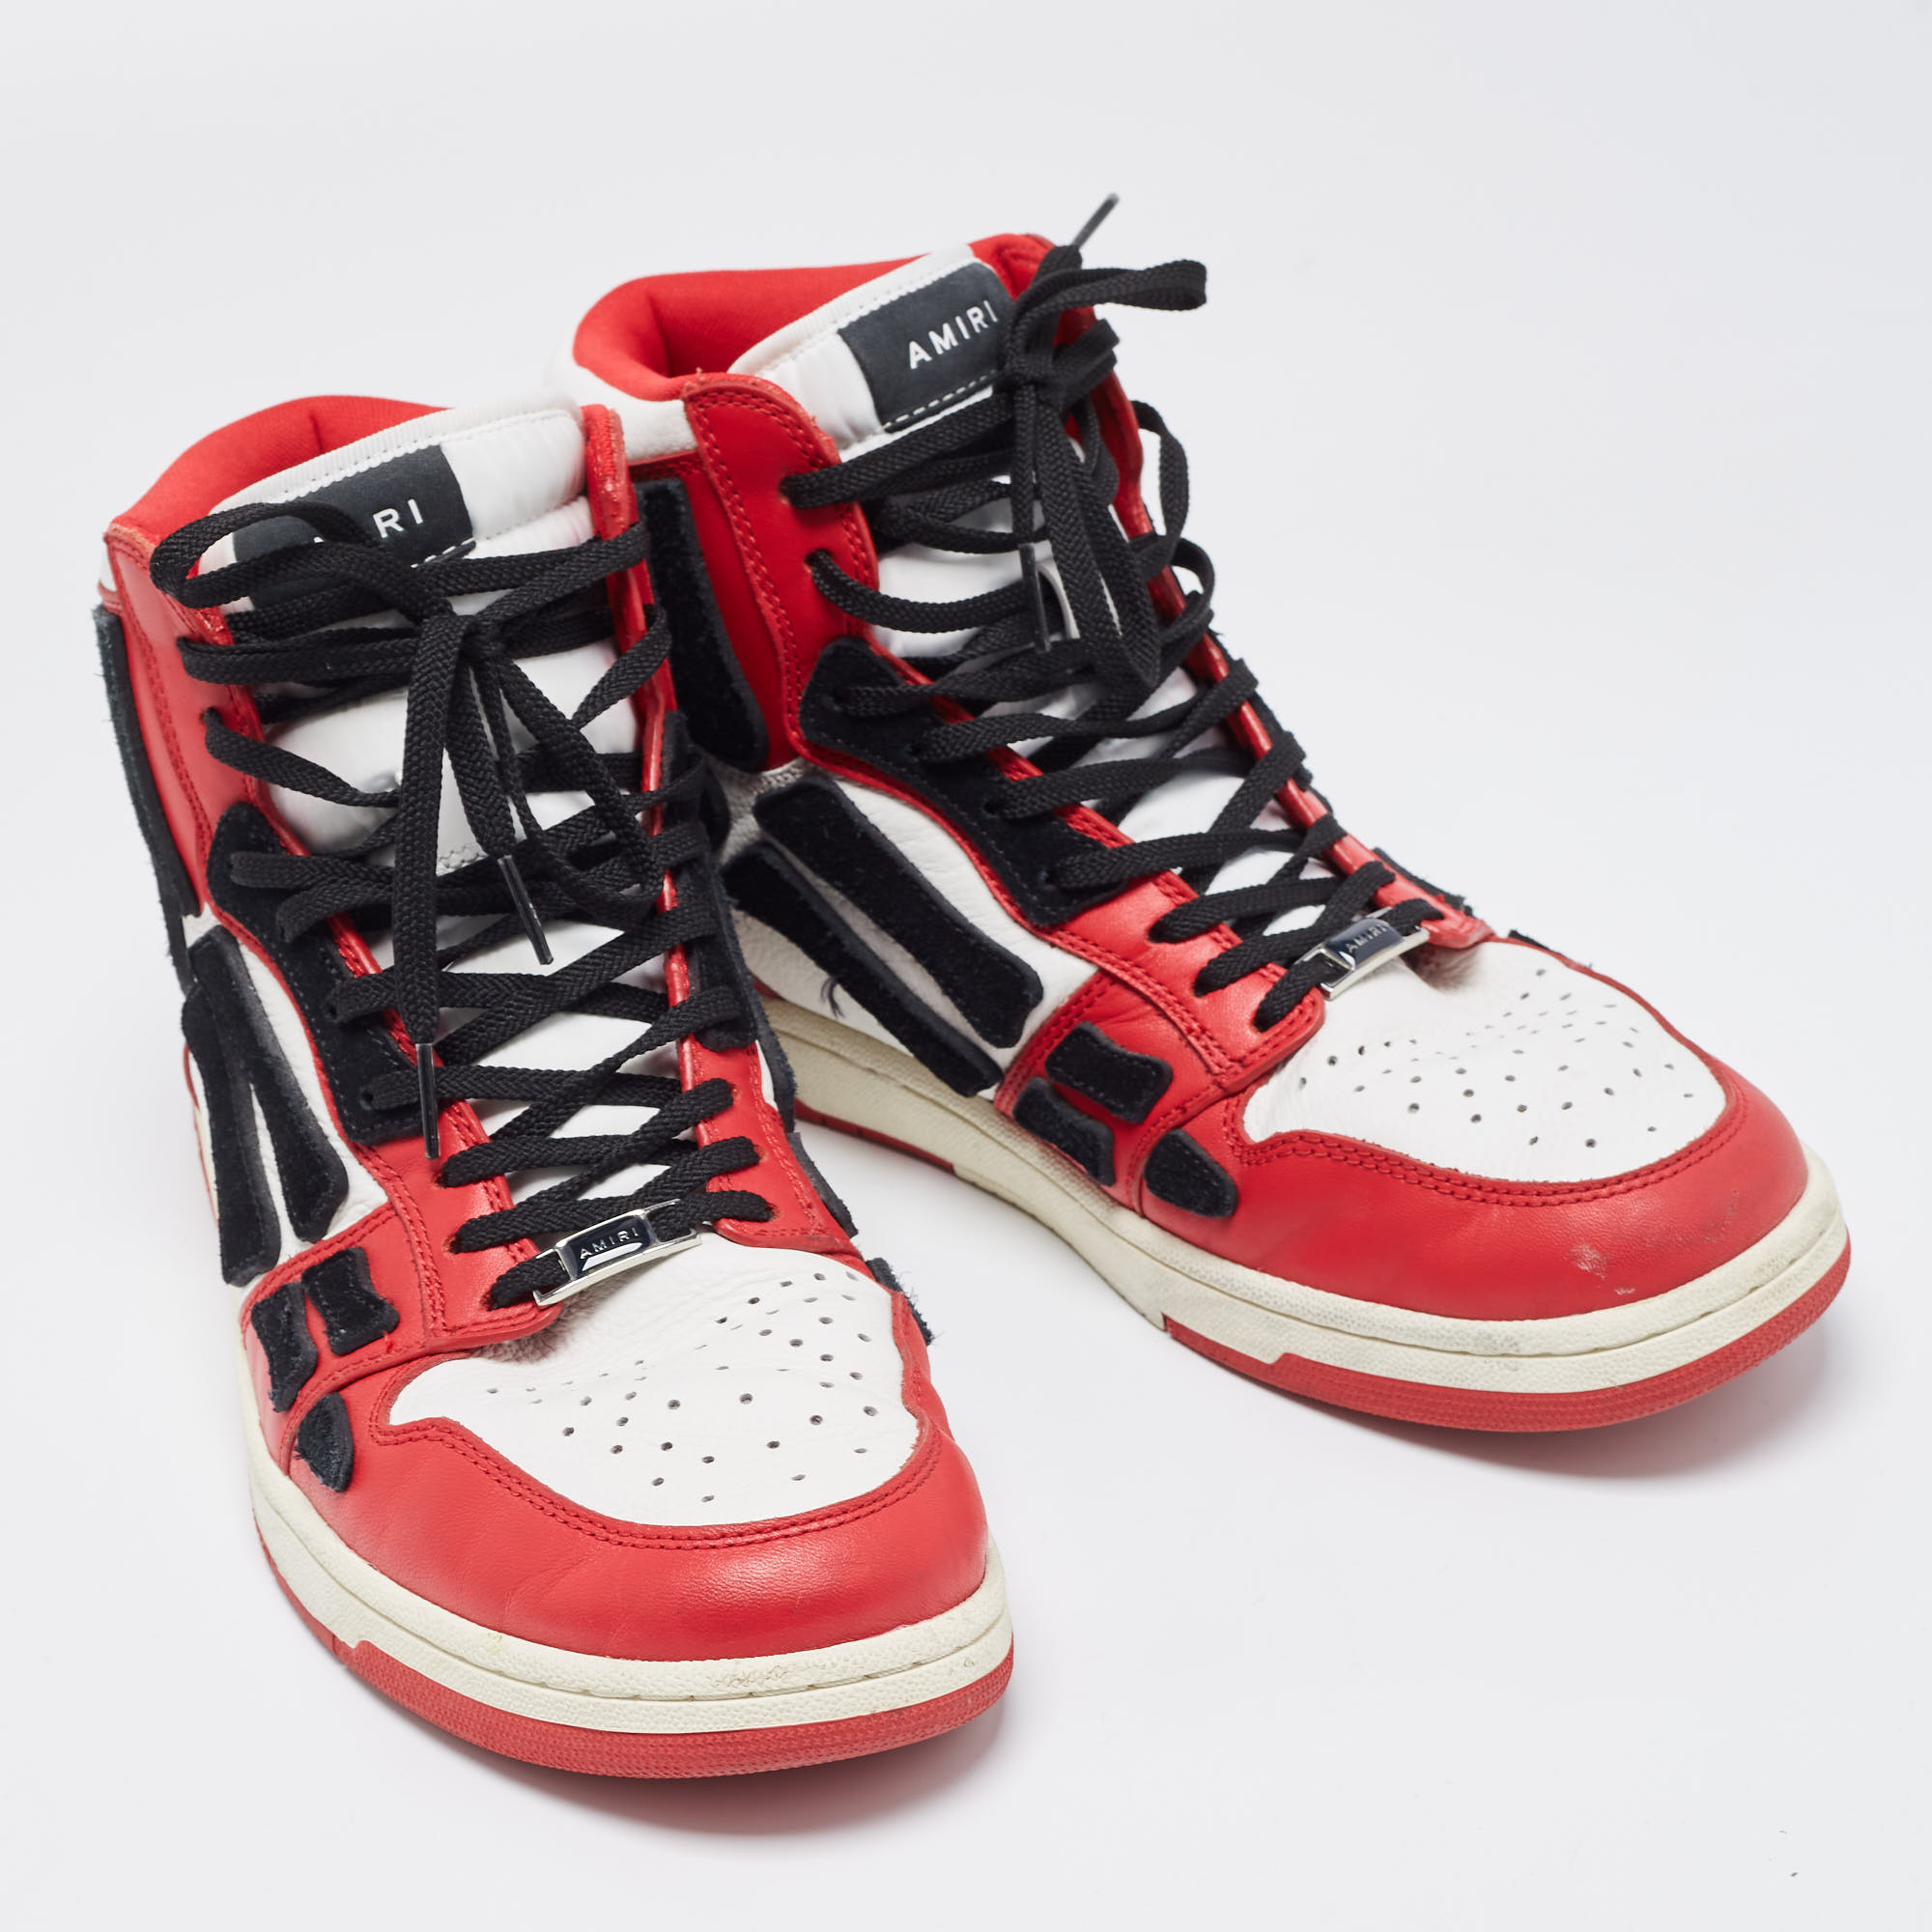 Amiri Red/White Leather Skel High Top Sneakers Size 44